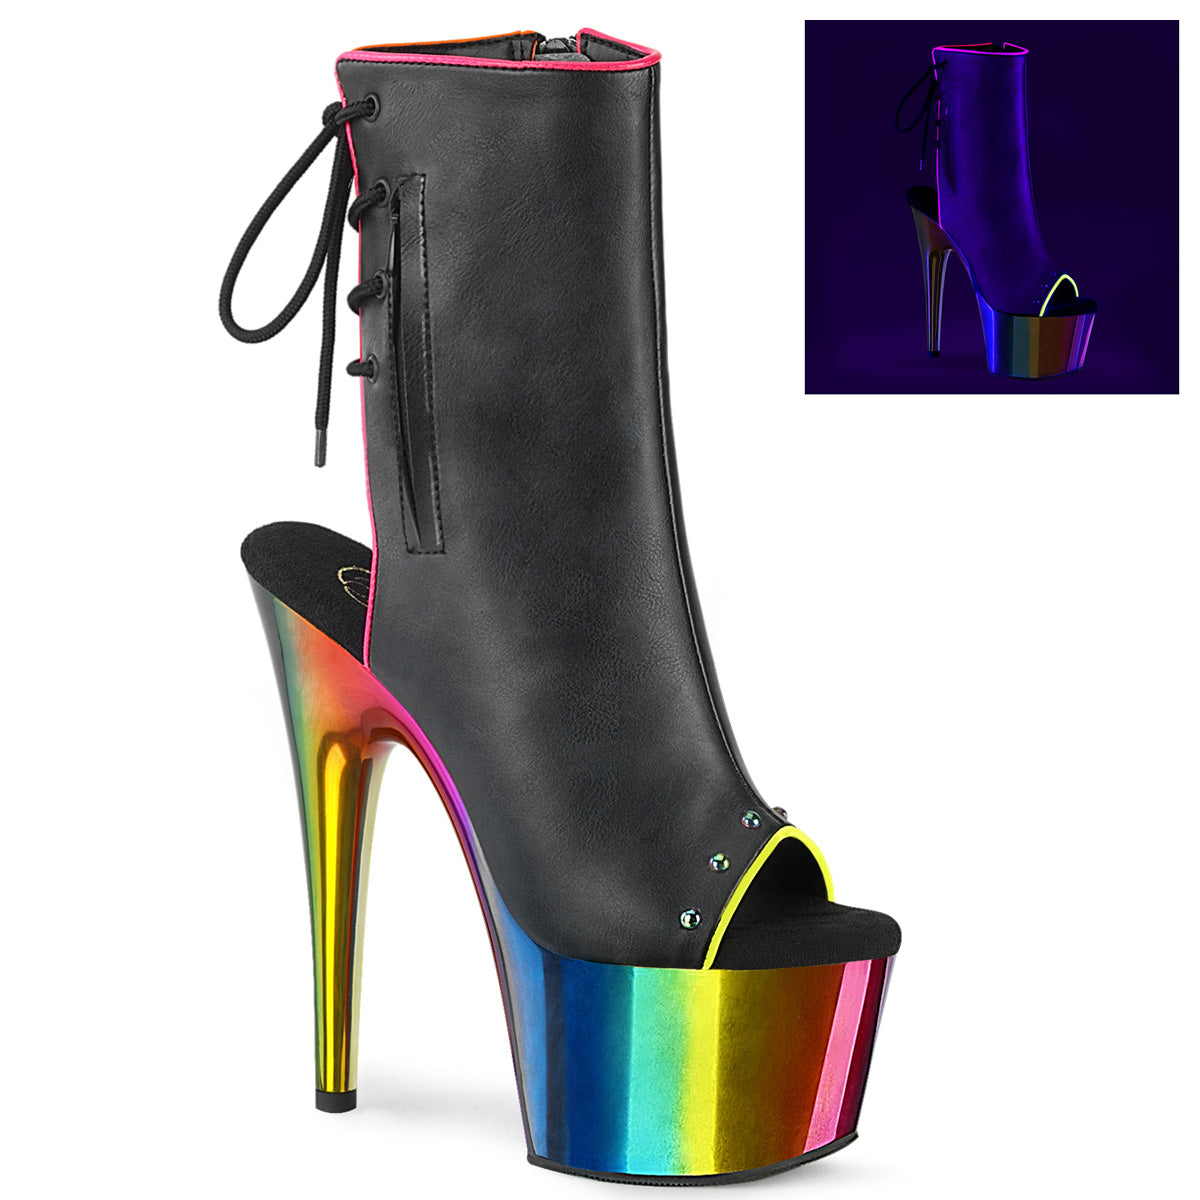 ADORE-1018RC-02 Pleasers Rainbow Chrome Exotic Dancing Ankle Boots